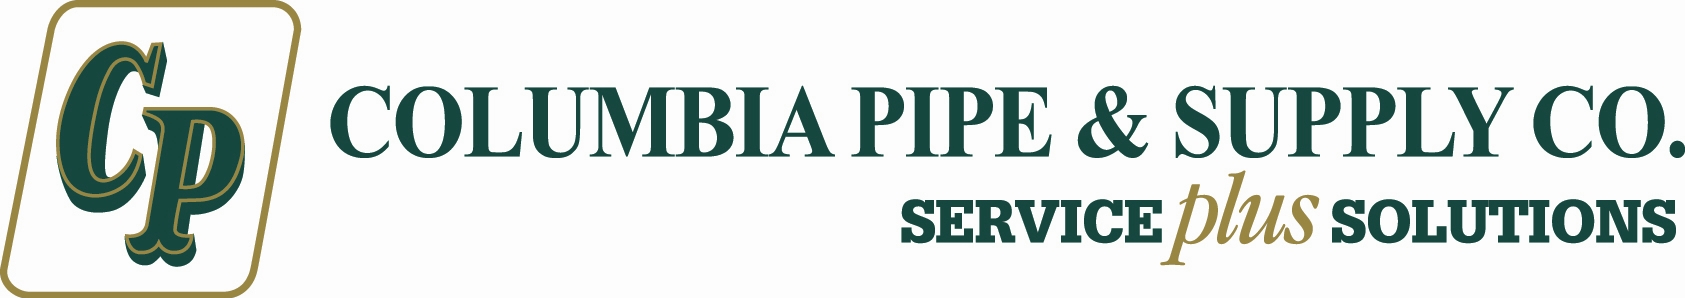 Columbia Pipe Logo - Columbia Pipe & Supply Co - Job Opportunities